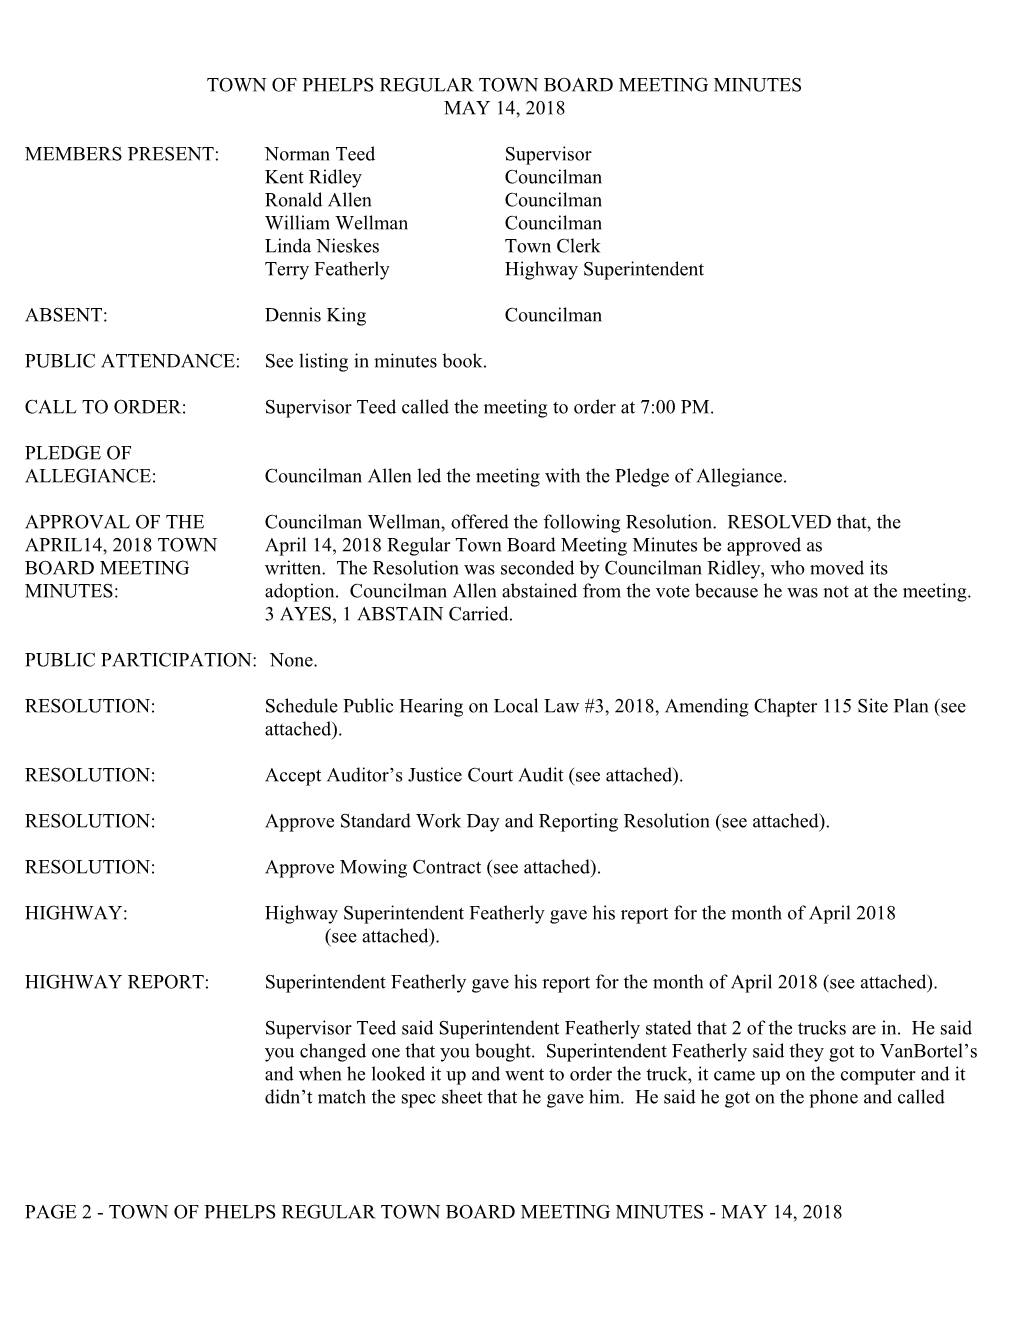 Town of Phelps Regular Town Board Meeting Minutes